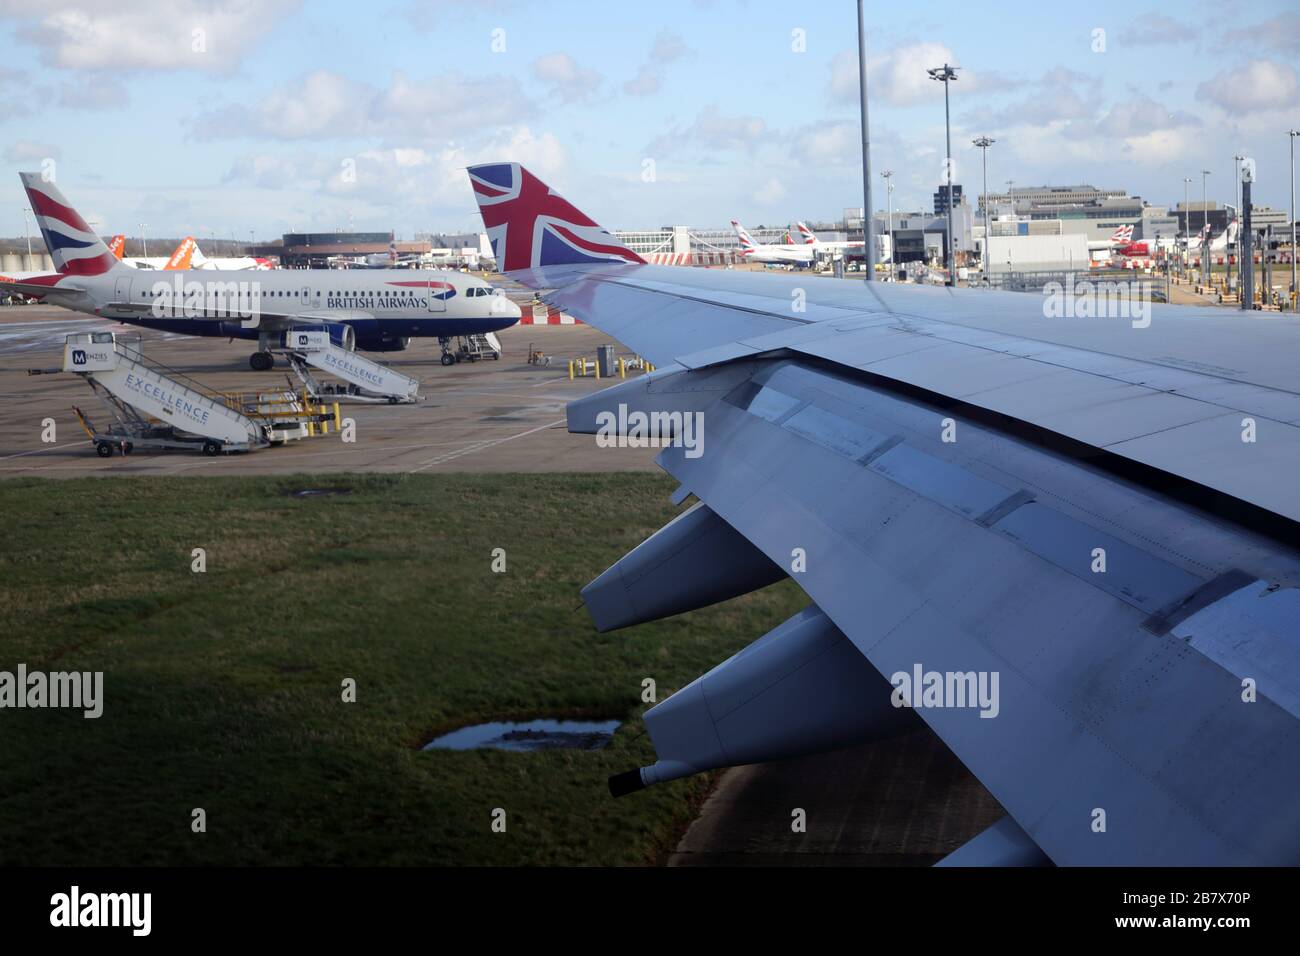 Gatwick Airport England  Aeroplane Boeing 747-400 (744) View of Wing showing Flap Track Fairings and Union Jack Design on Wing Tip and British Airways Stock Photo